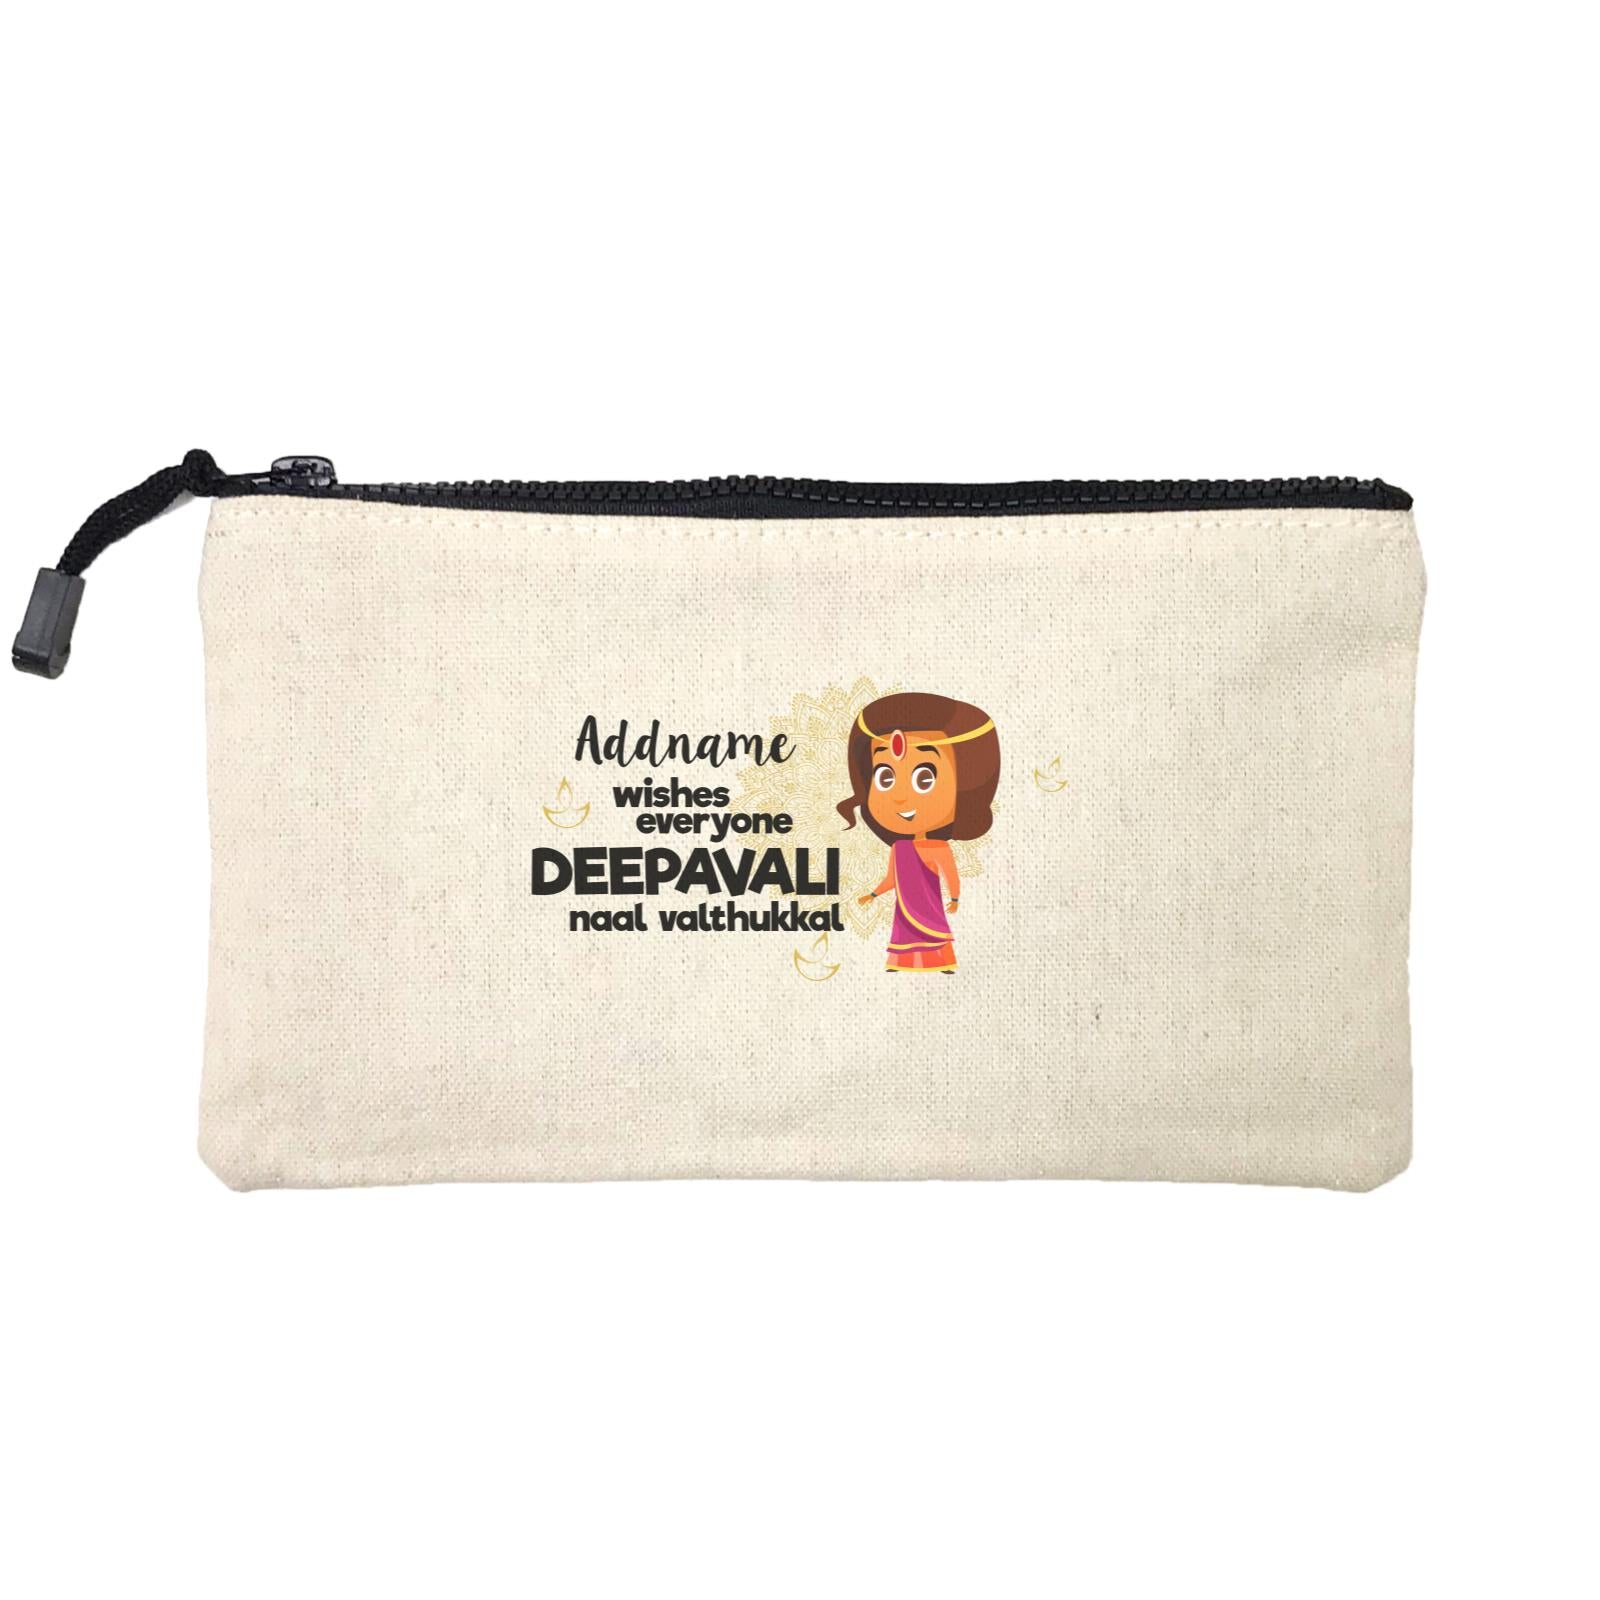 Cute Girl Wishes Everyone Deepavali Addname Mini Accessories Stationery Pouch